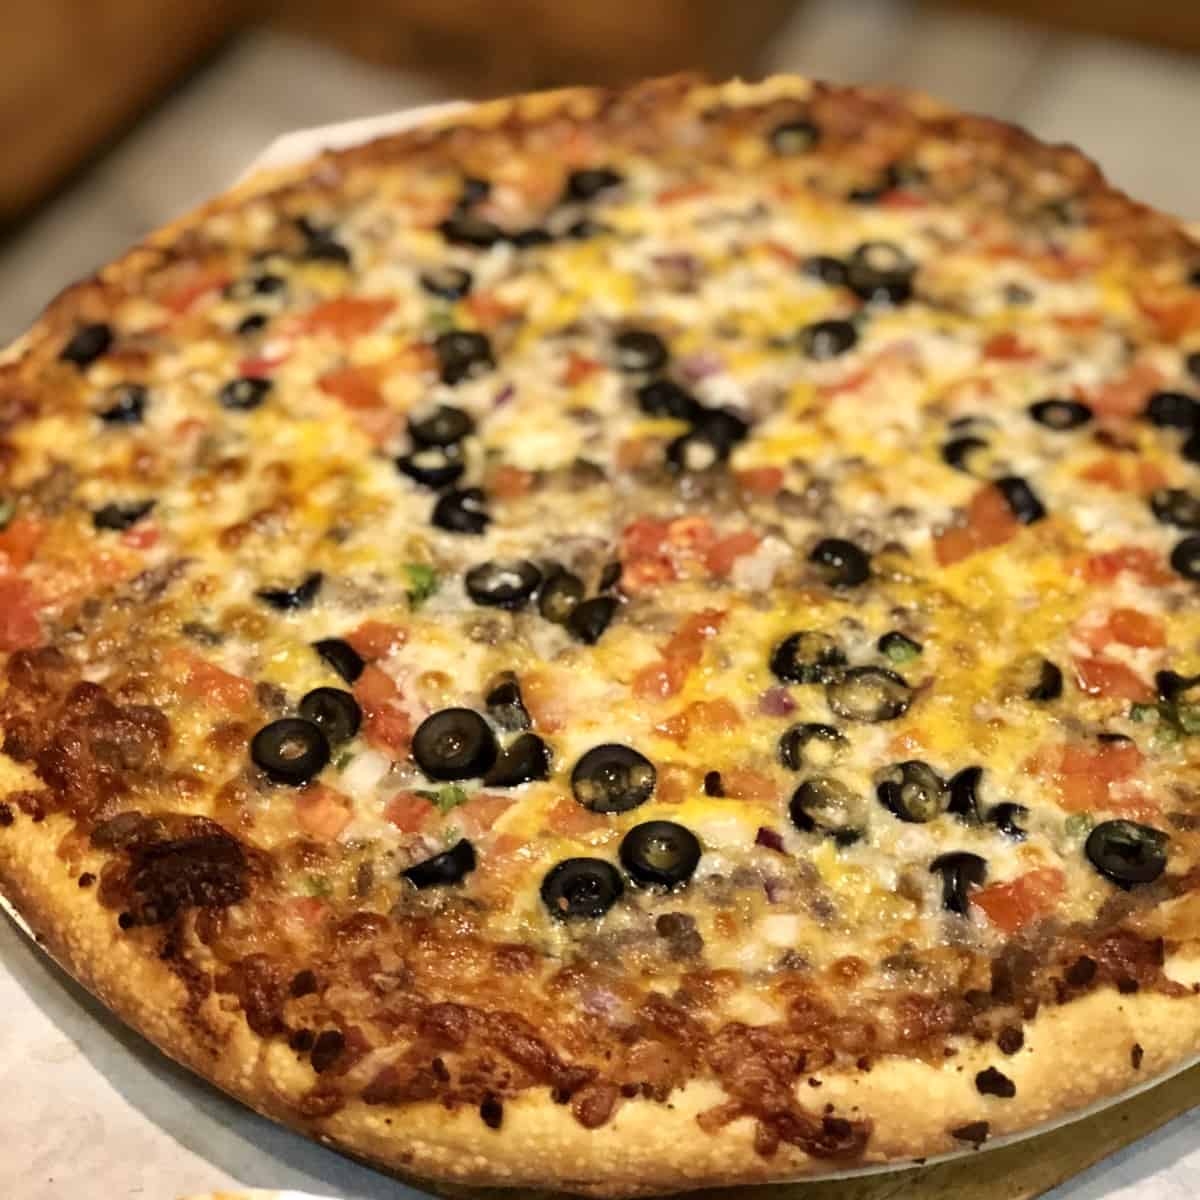 Pizza with olives and other toppings